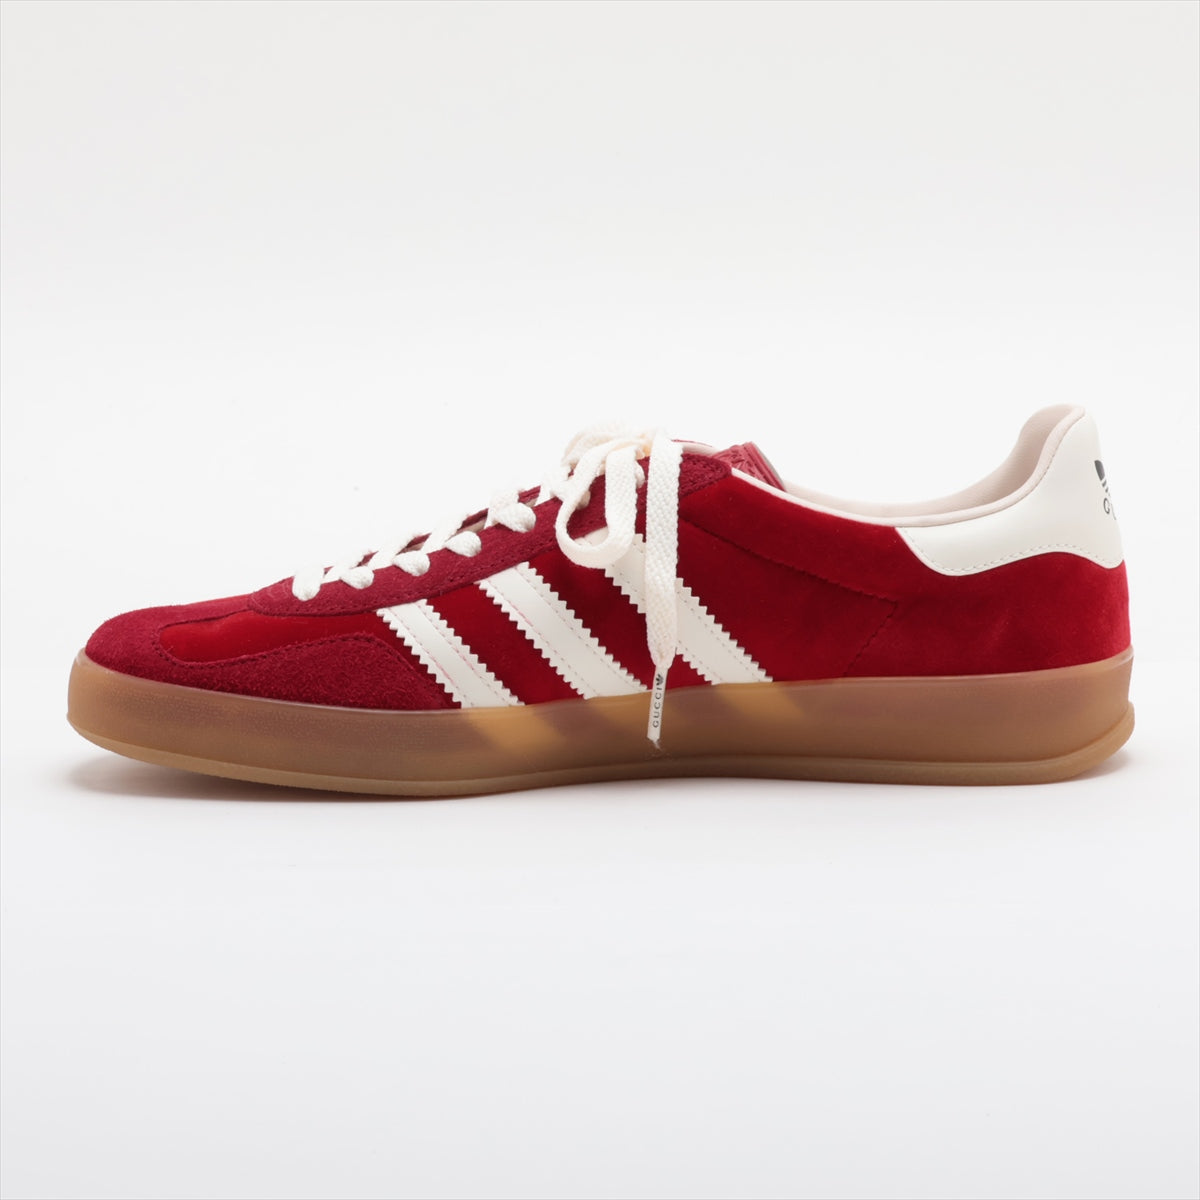 Gucci x Adidas Gasel Belloor x Leather Trainers 25.5cm Unisex Red x White 707848 HQ8853  Homo Box Bag